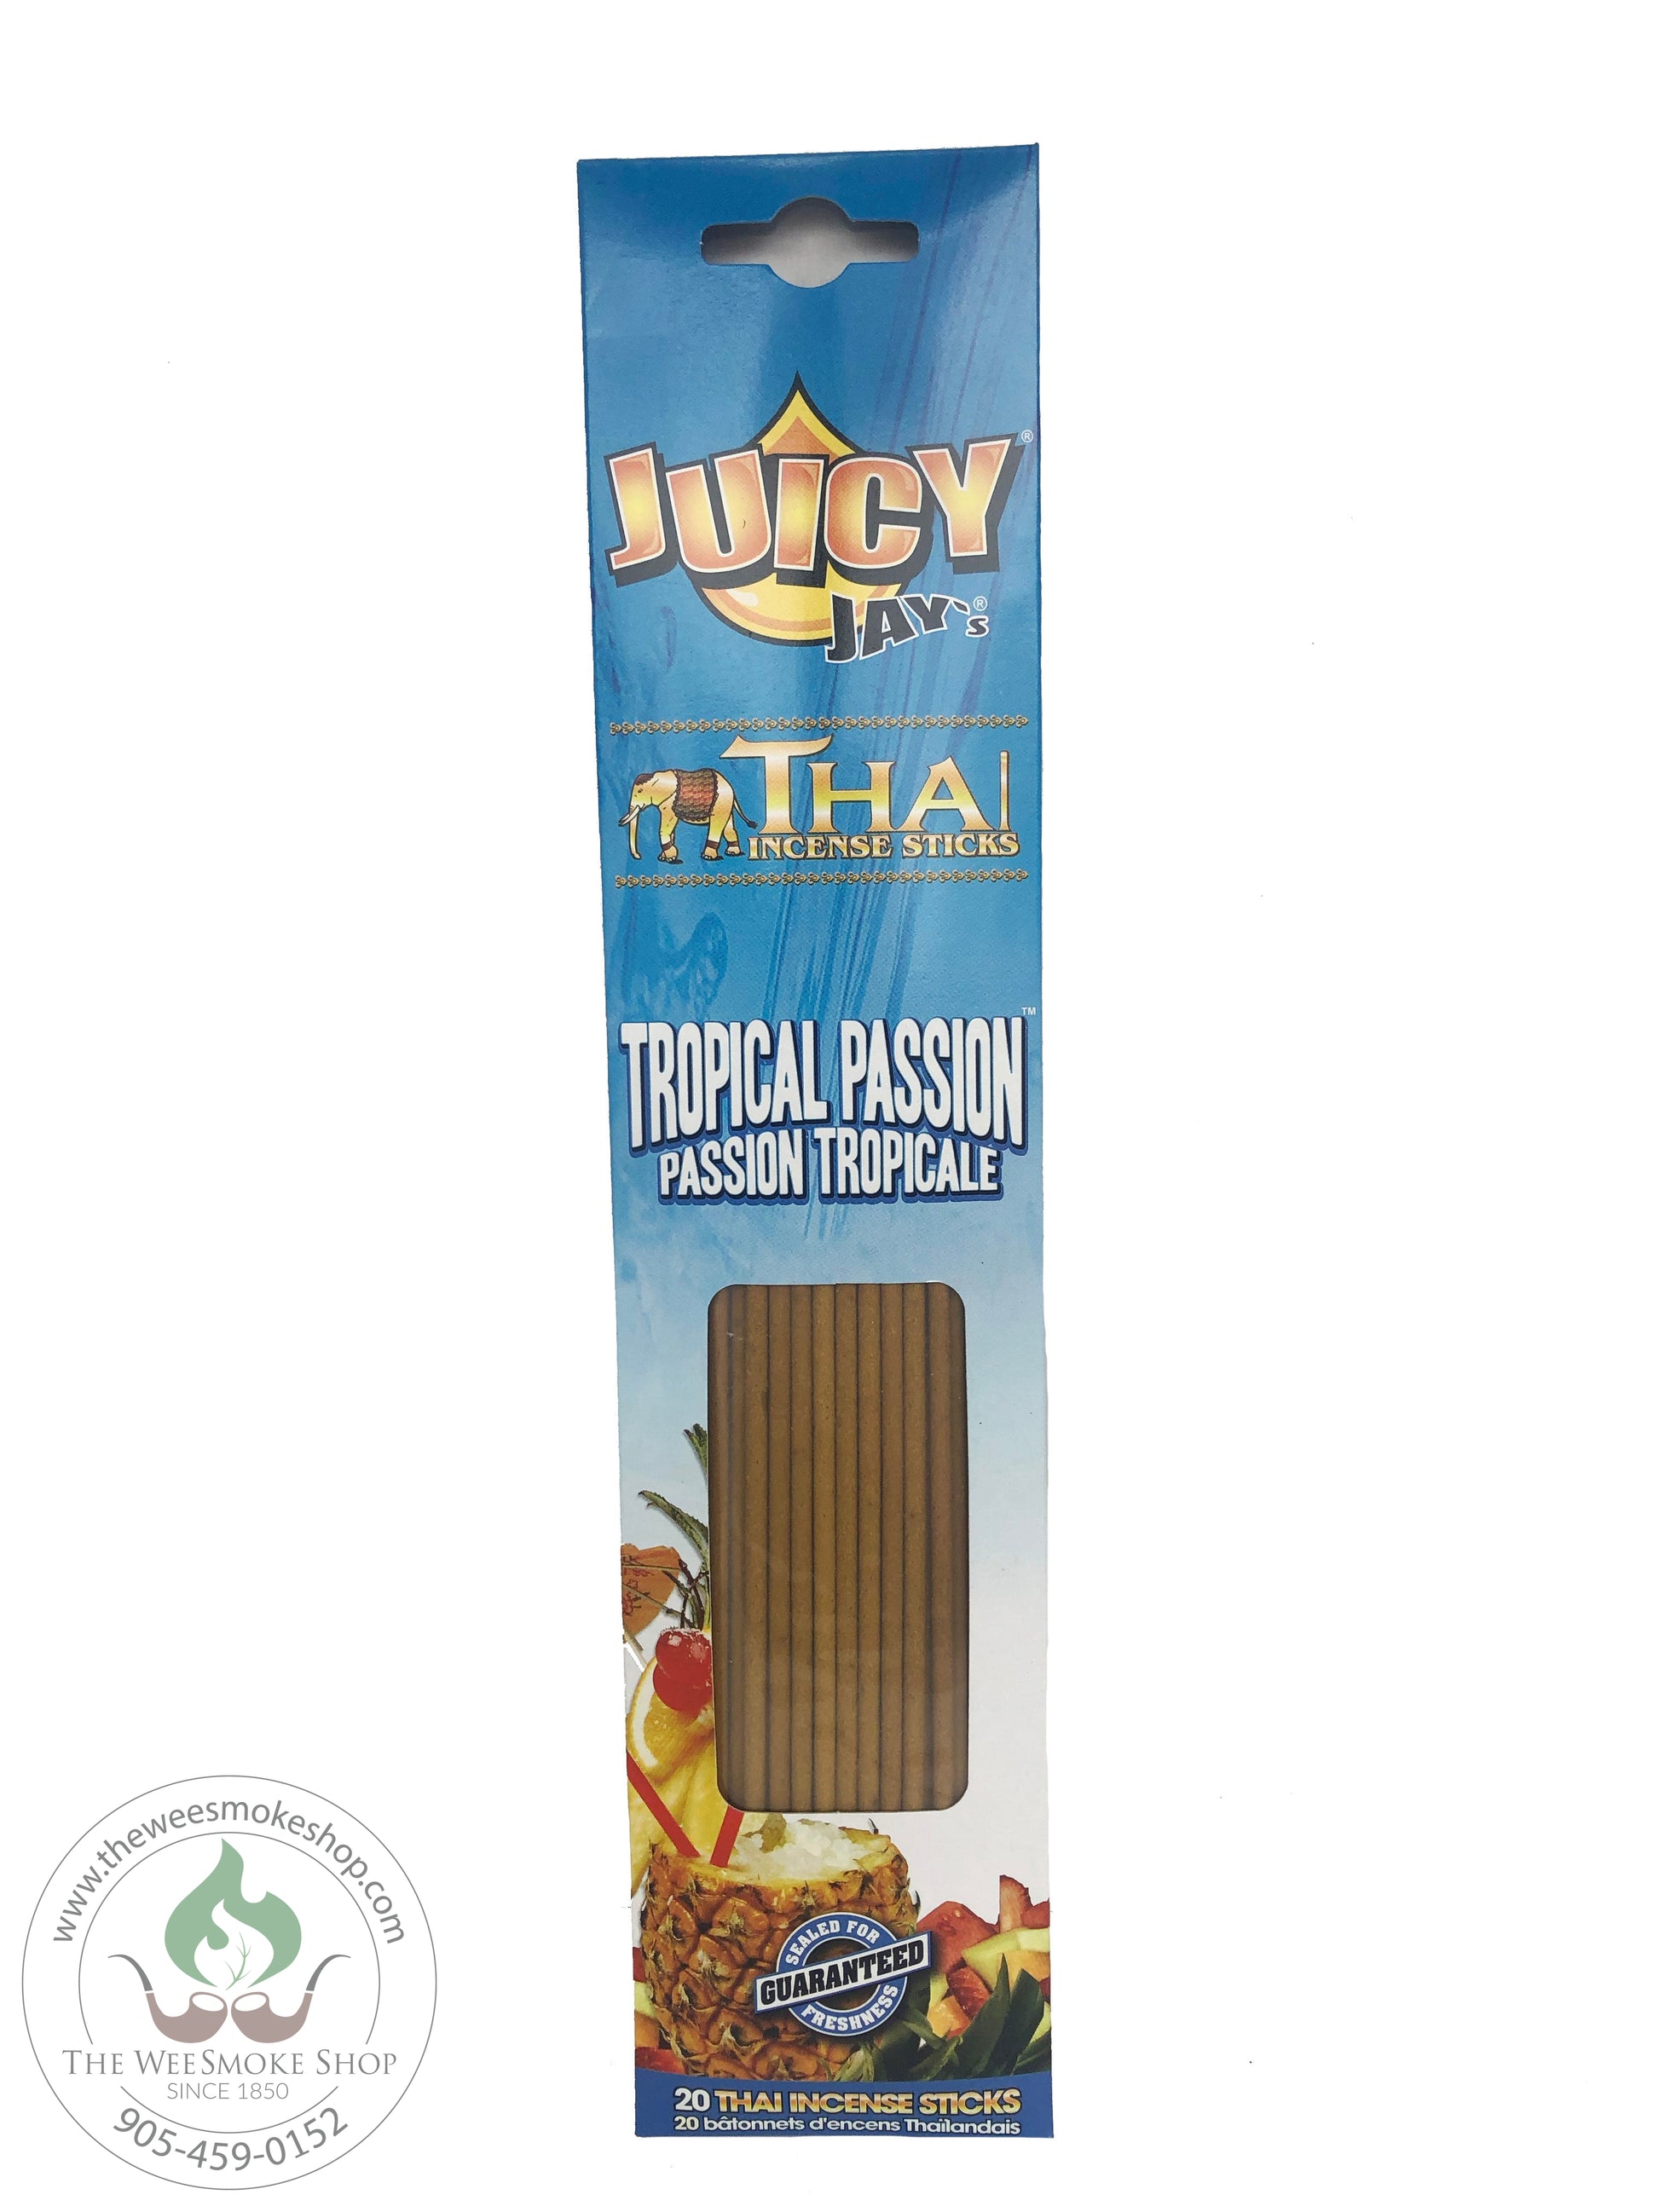 Tropical Passion-Juicy Jay Incense